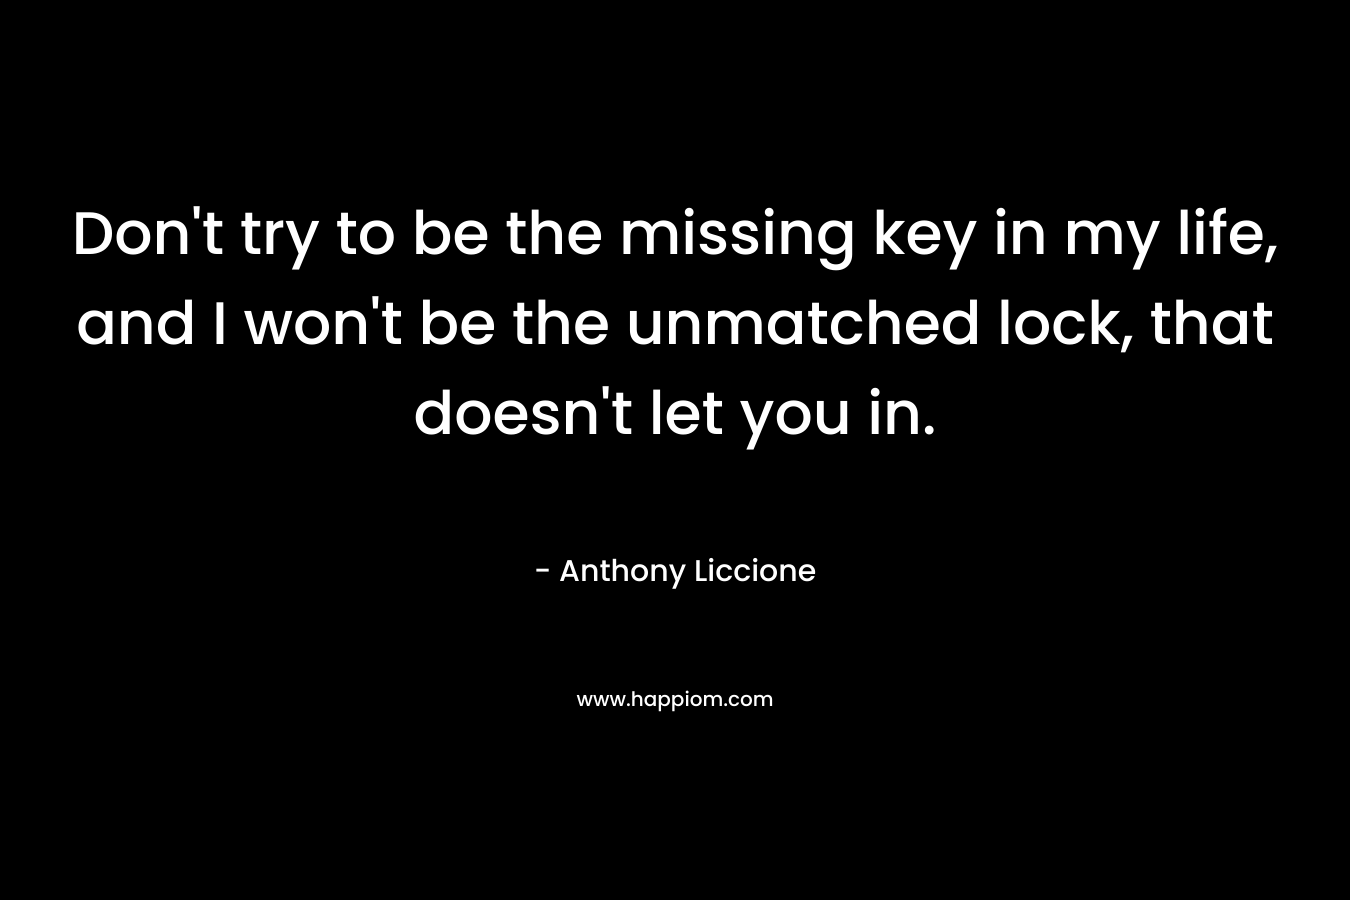 Don’t try to be the missing key in my life, and I won’t be the unmatched lock, that doesn’t let you in. – Anthony Liccione